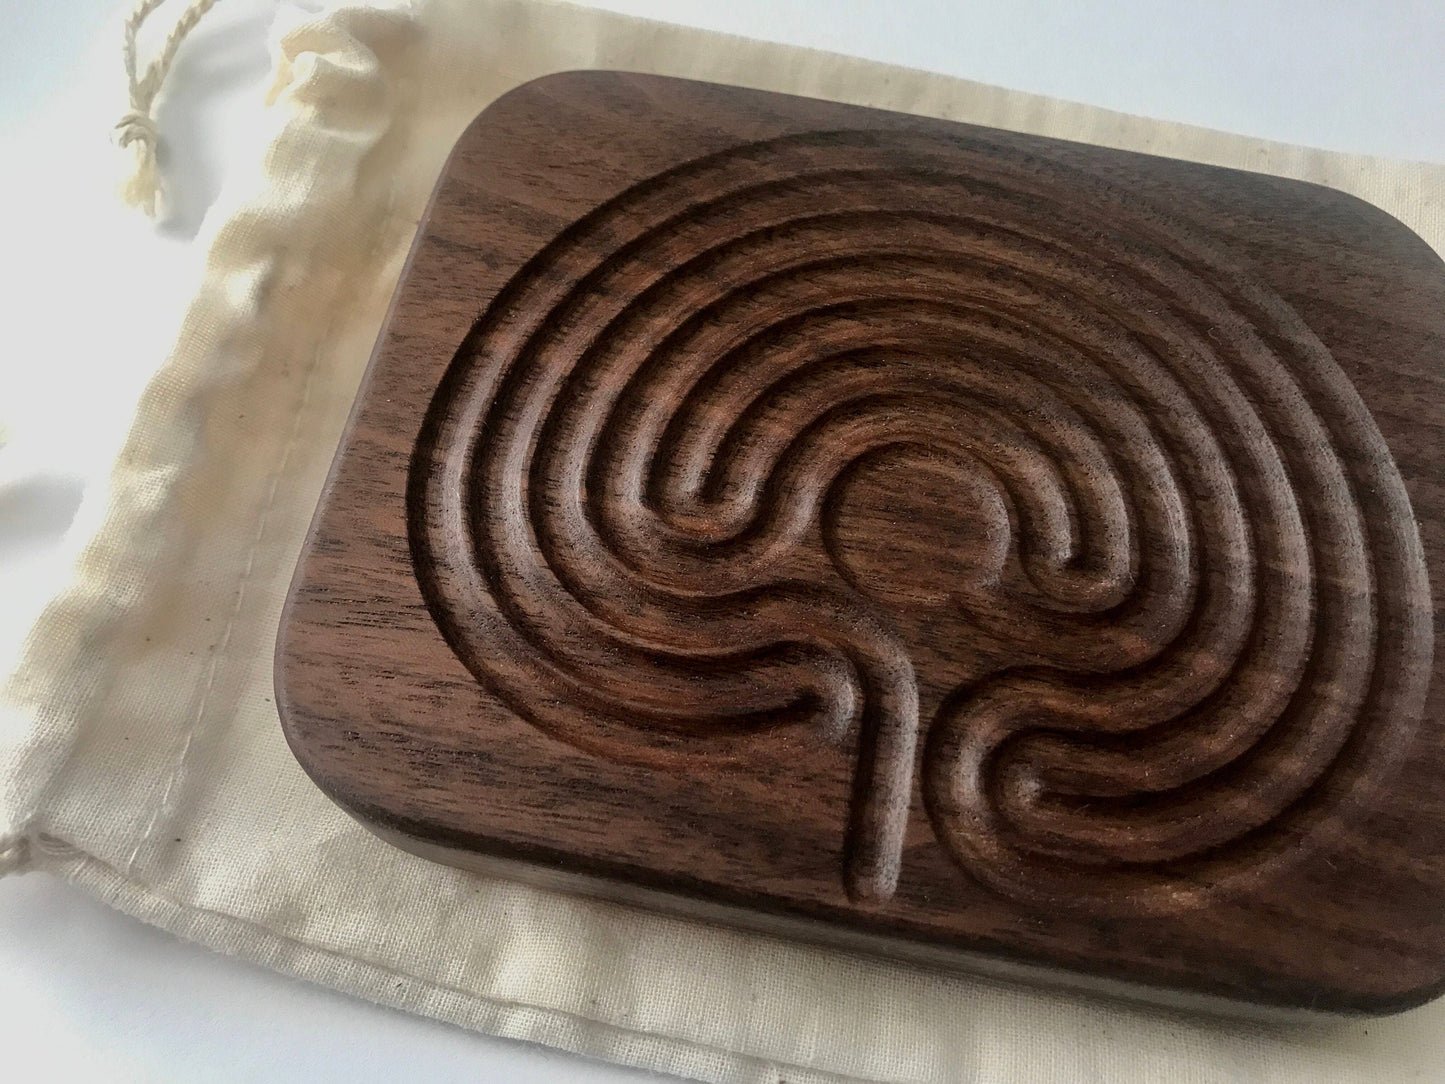 Bundle of Two Small Classical Finger Labyrinths, Walnut Wood, 4.75" by 3.75"